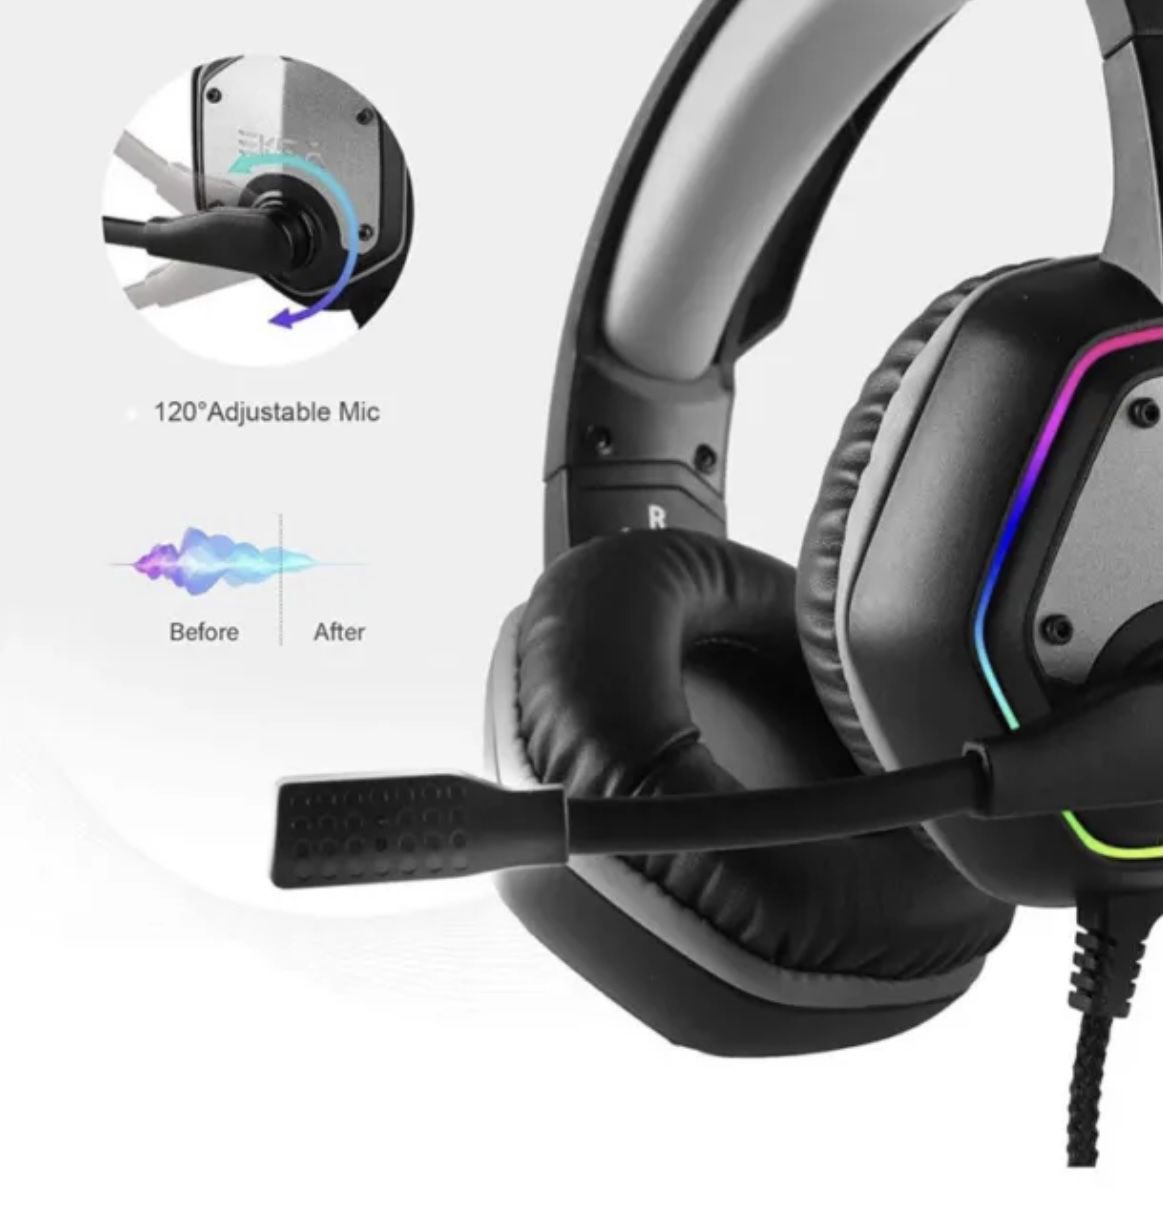 EKSA E1000 USB Gaming Headset - PS4 PC MAC - 7.1 Surround - Pouch Included